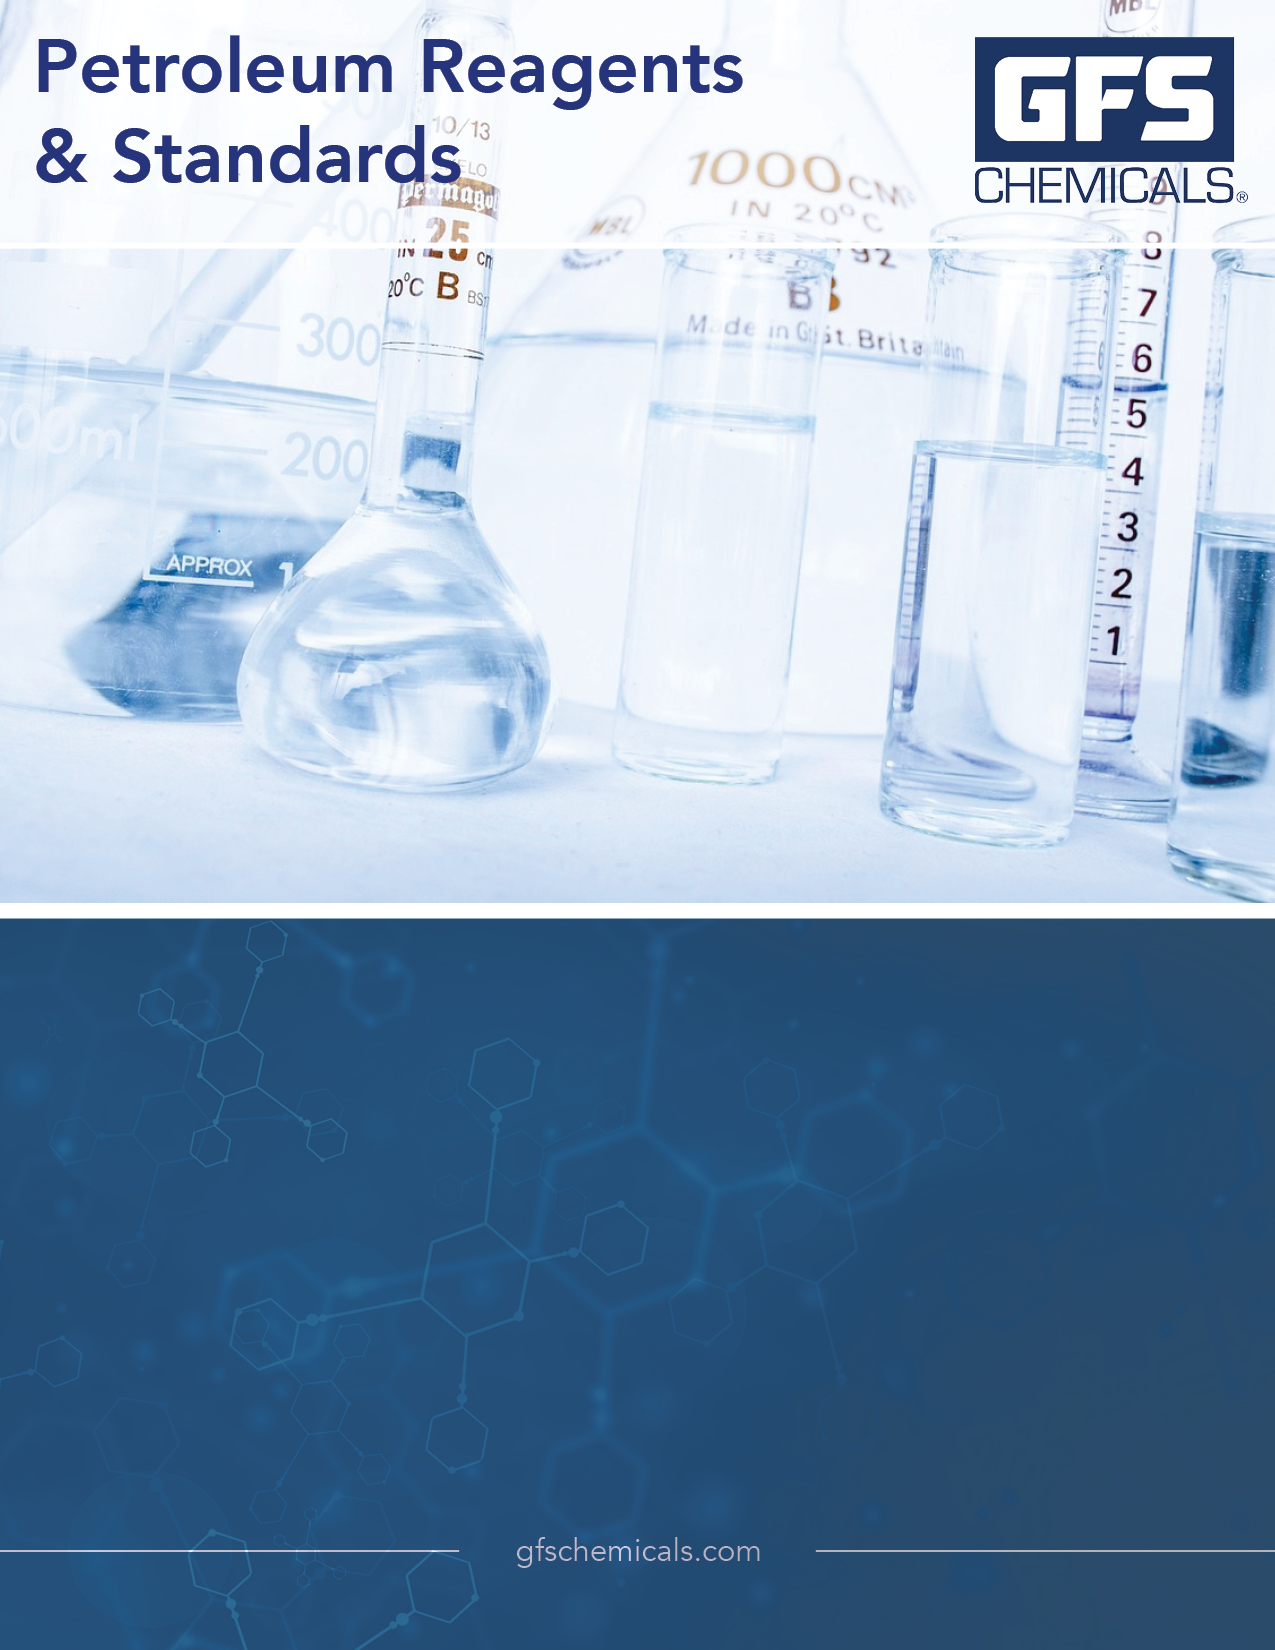 Petroleum Reagents and Standards Brochure GFS Chemicals